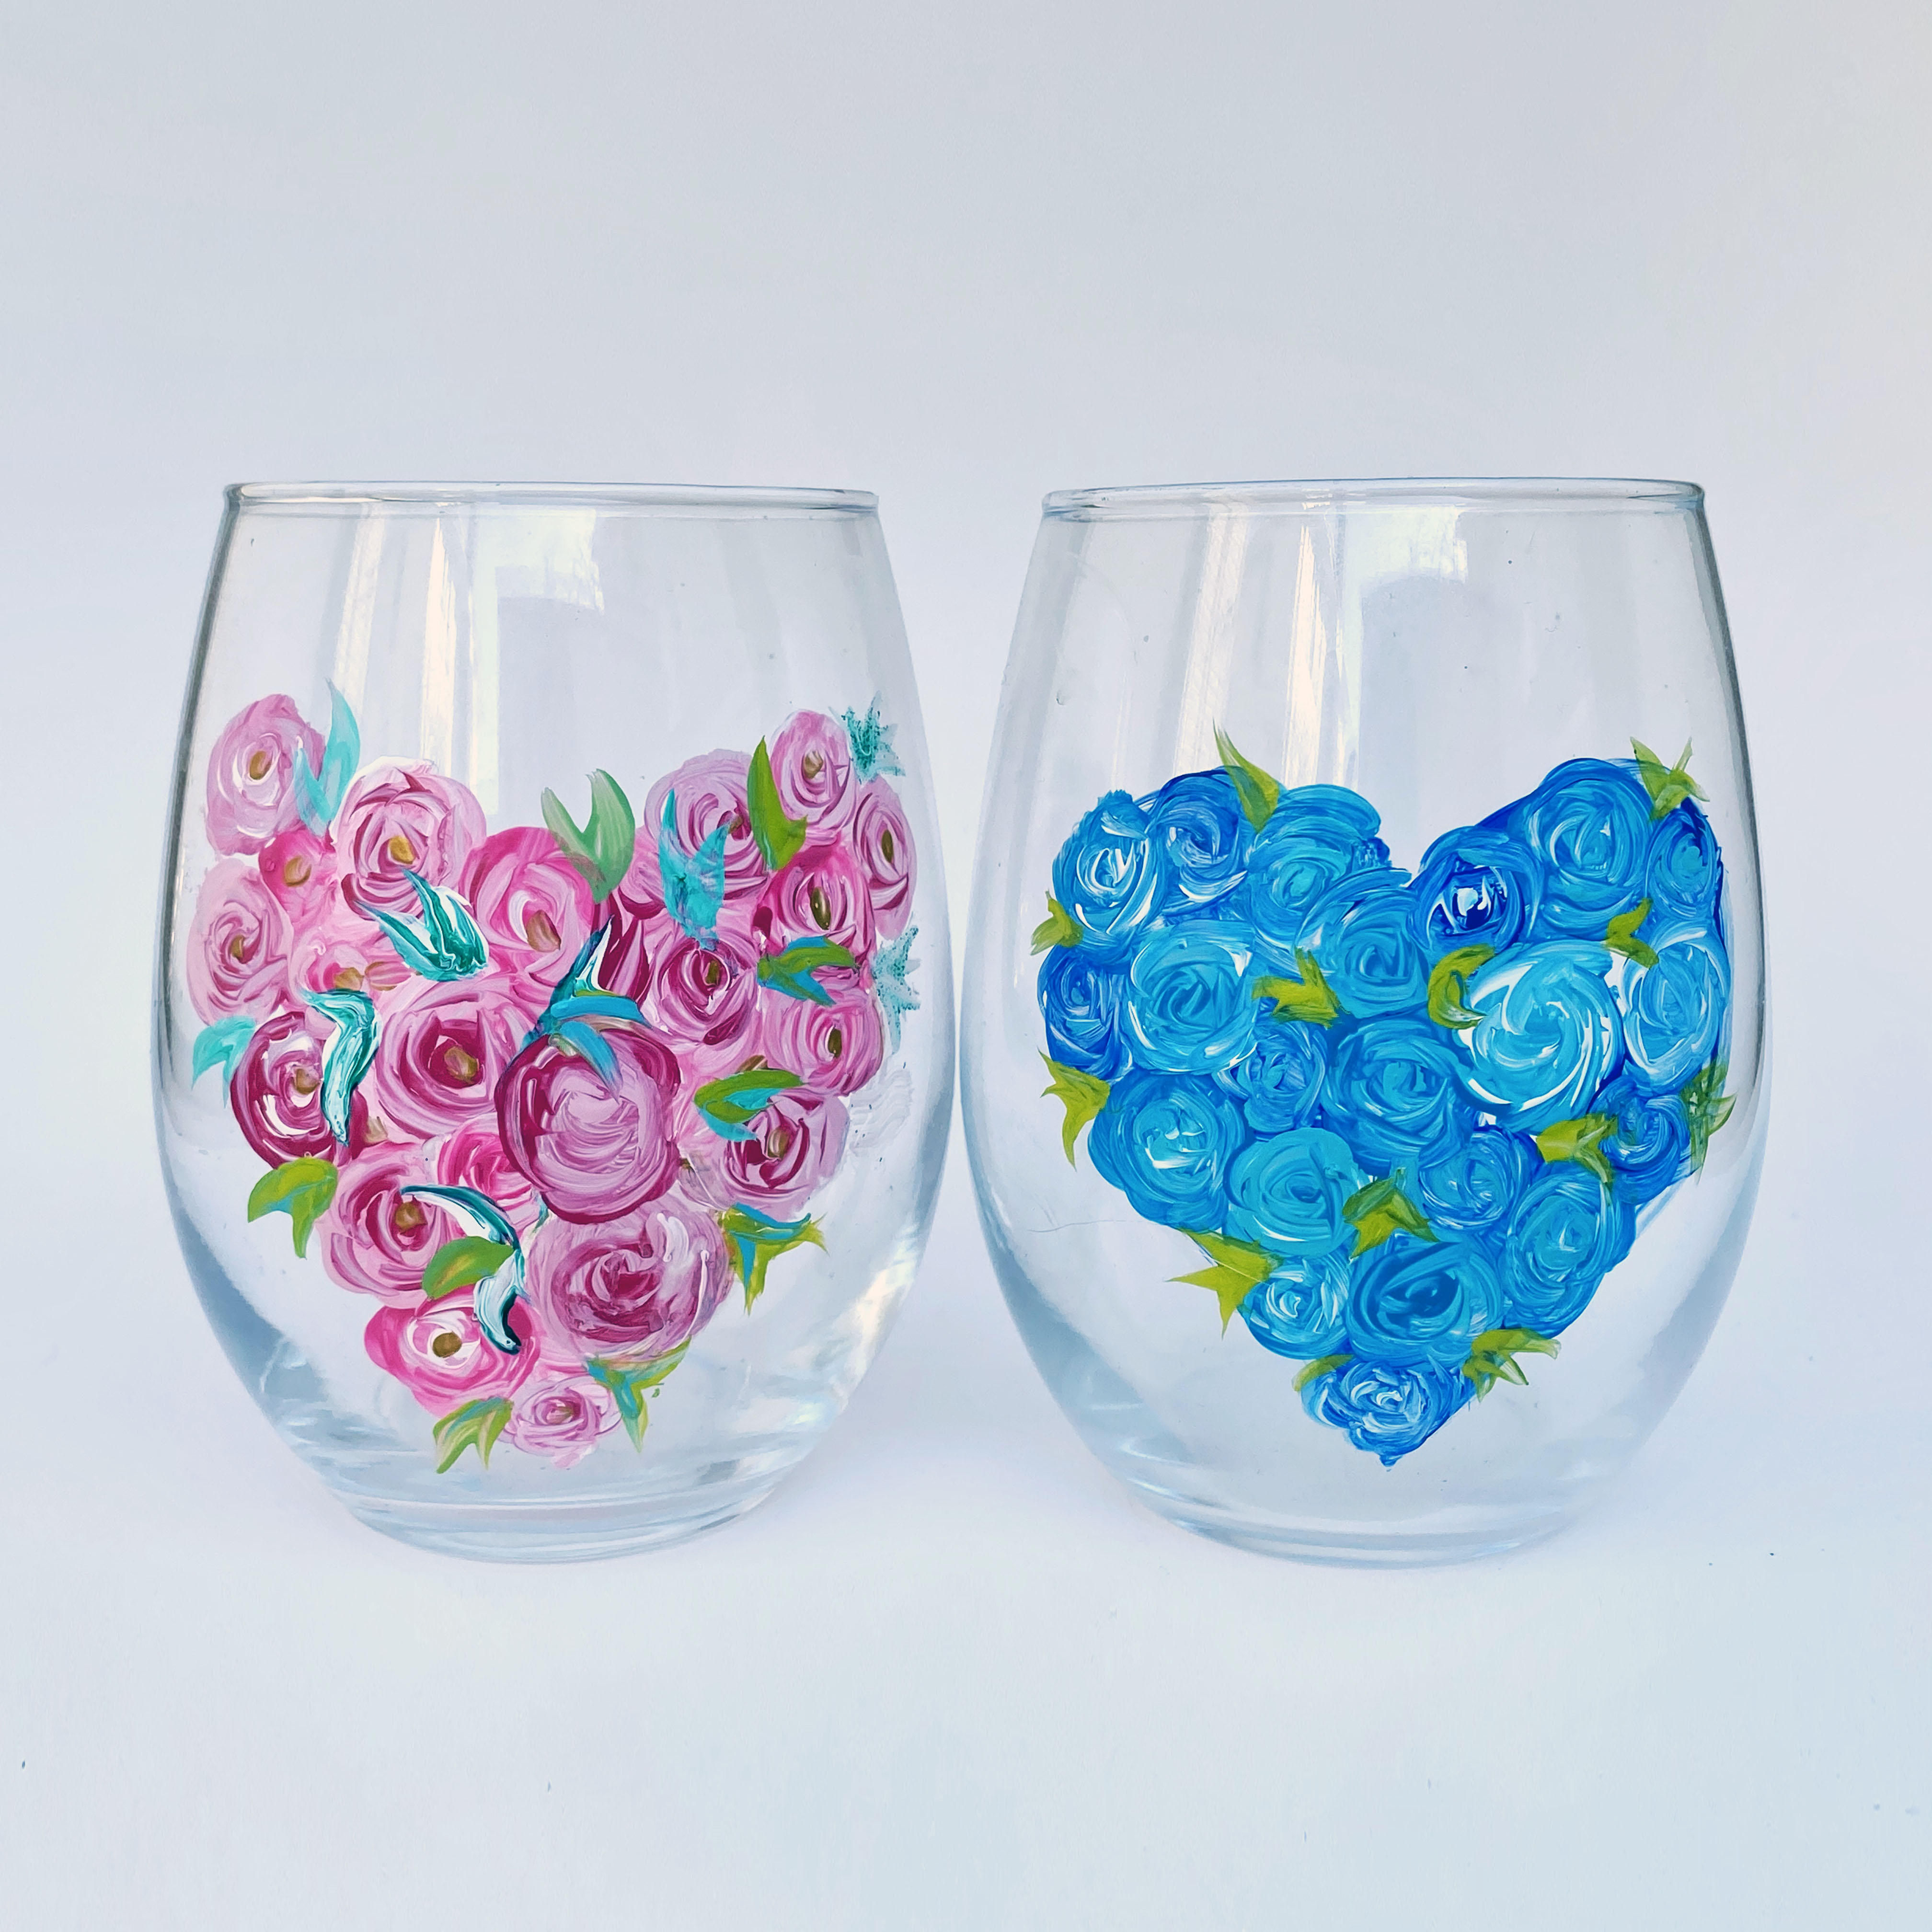 A Floral Hearts Stemless Wine Glasses experience project by Yaymaker